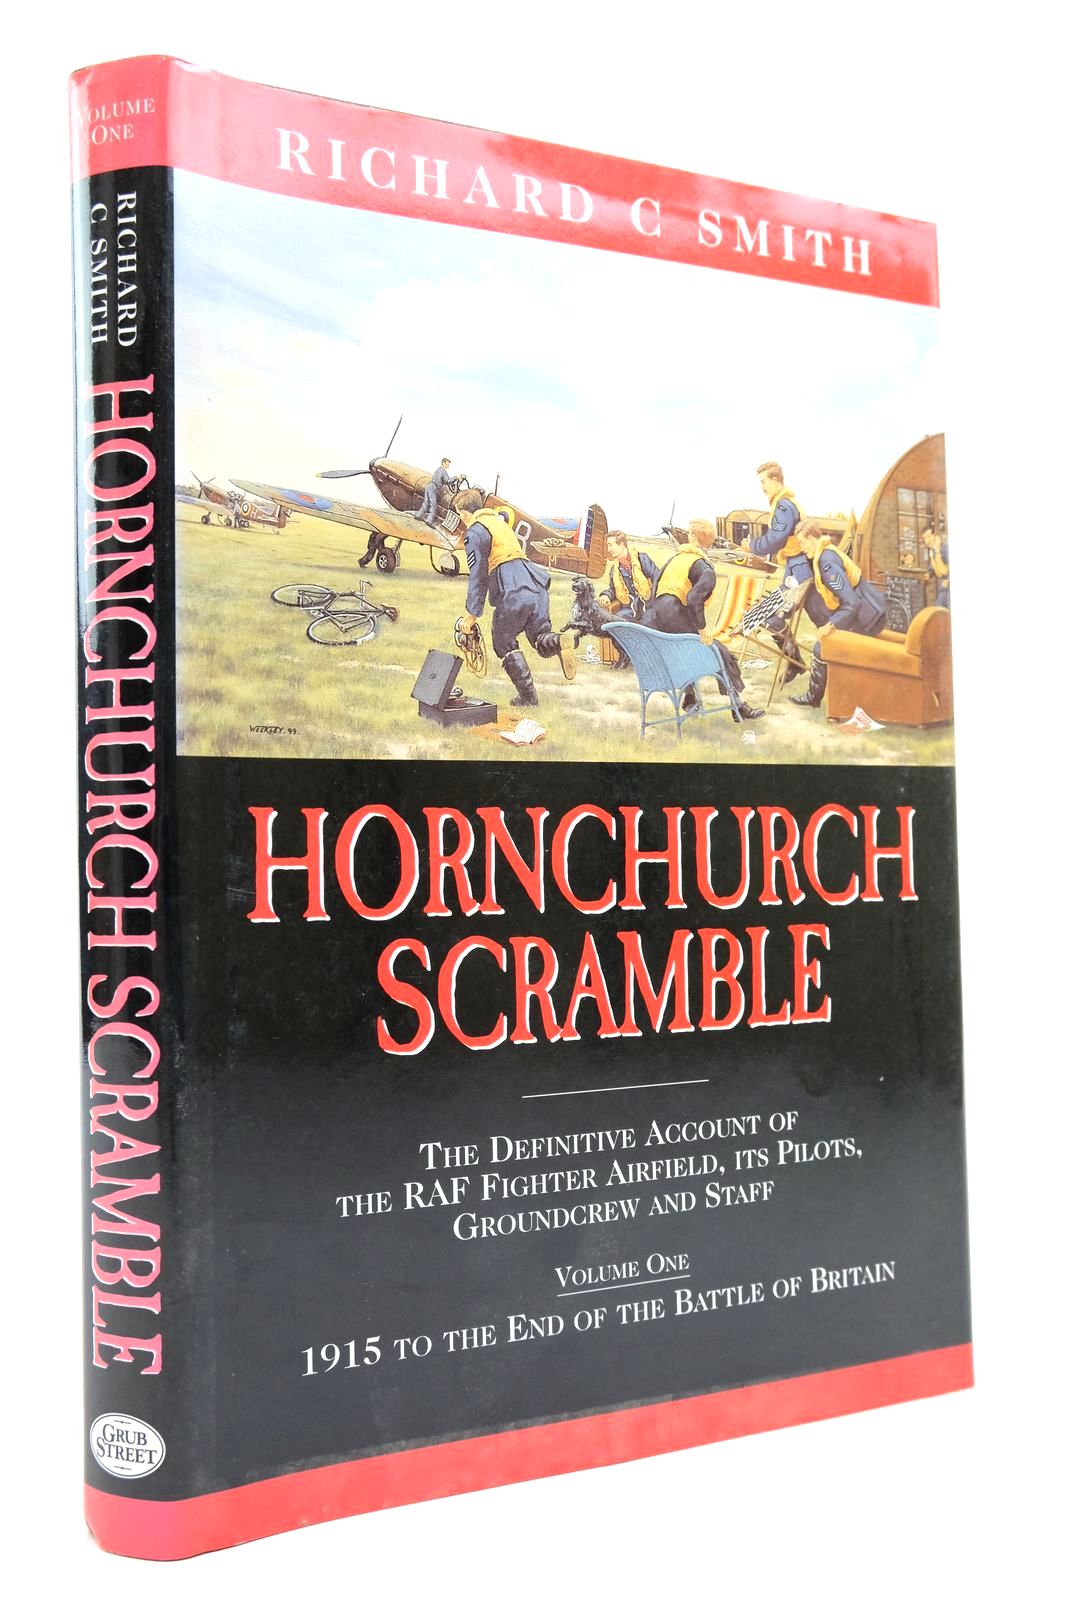 Photo of HORNCHURCH SCRAMBLE THE DEFINITIVE ACCOUNT OF THE RAF FIGHTER AIRFIELD, ITS PILOTS, GROUNDCREW AND STAFF- Stock Number: 2140053